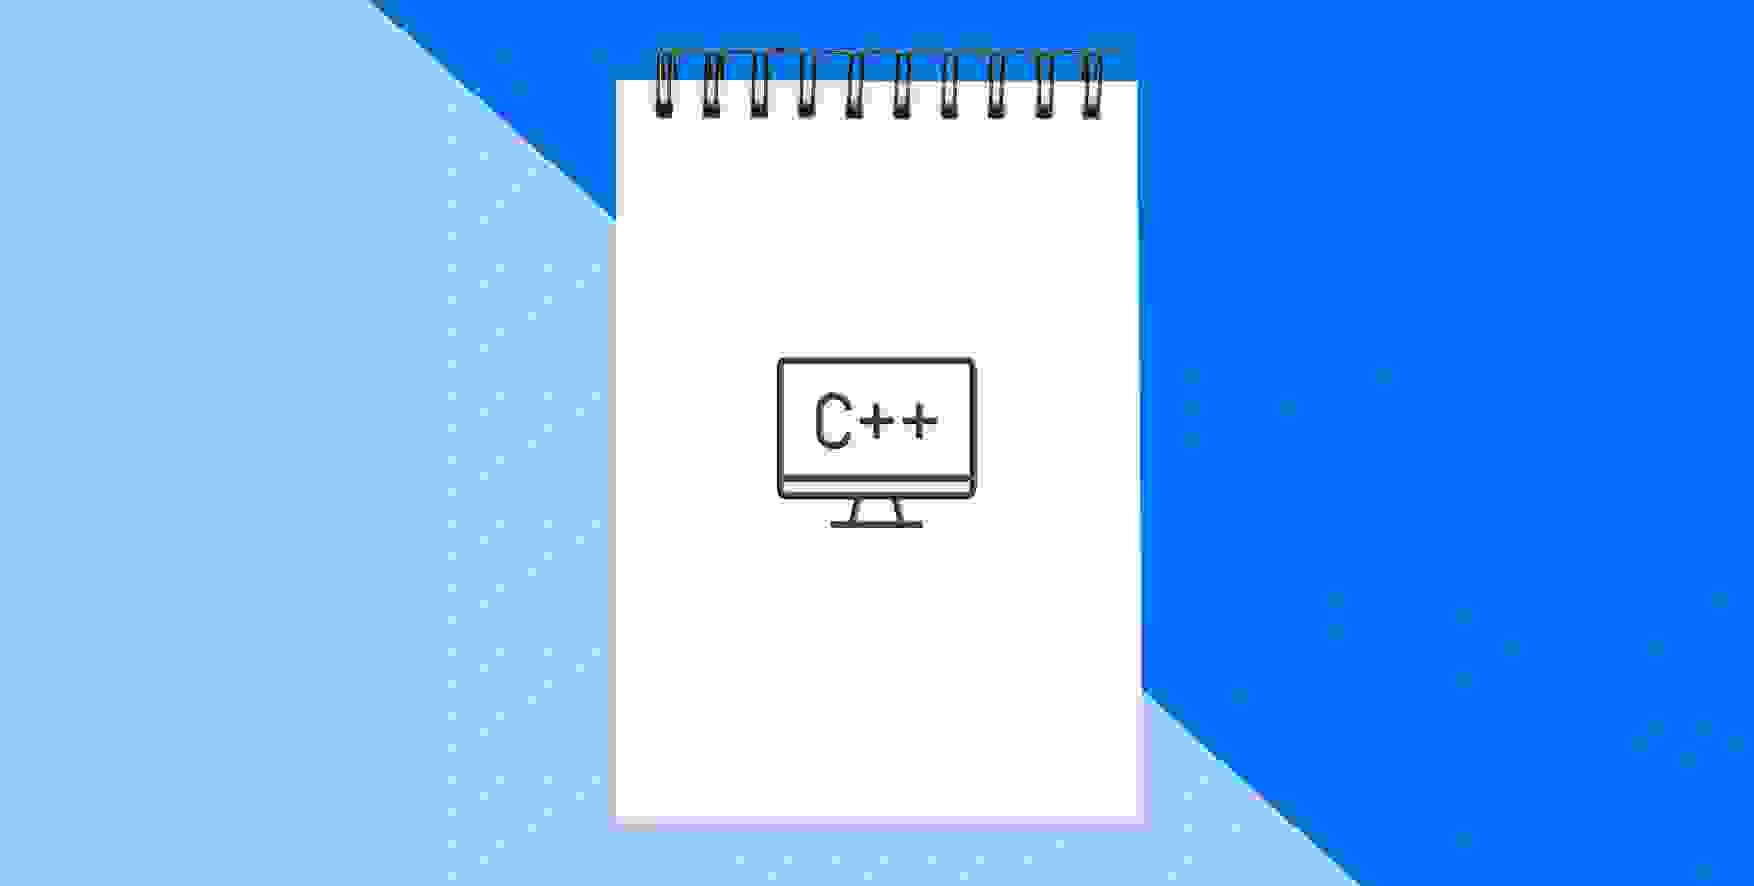 C++ on a piece of notepad